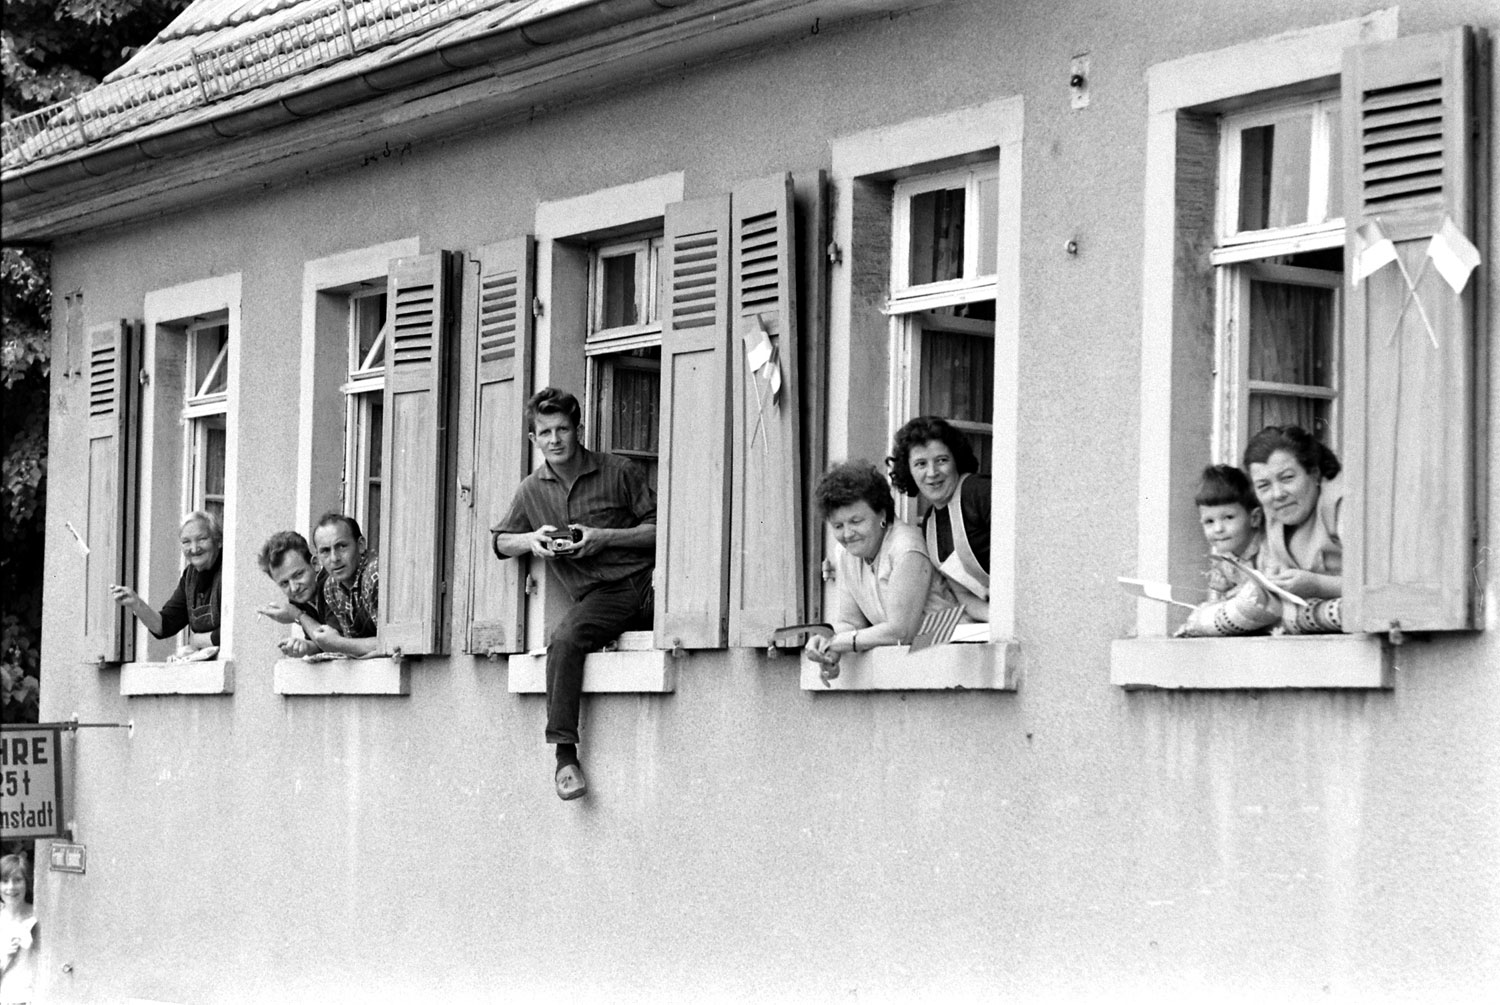 People watch from windows during President John F. Kennedy's June 1963 visit to Germany.